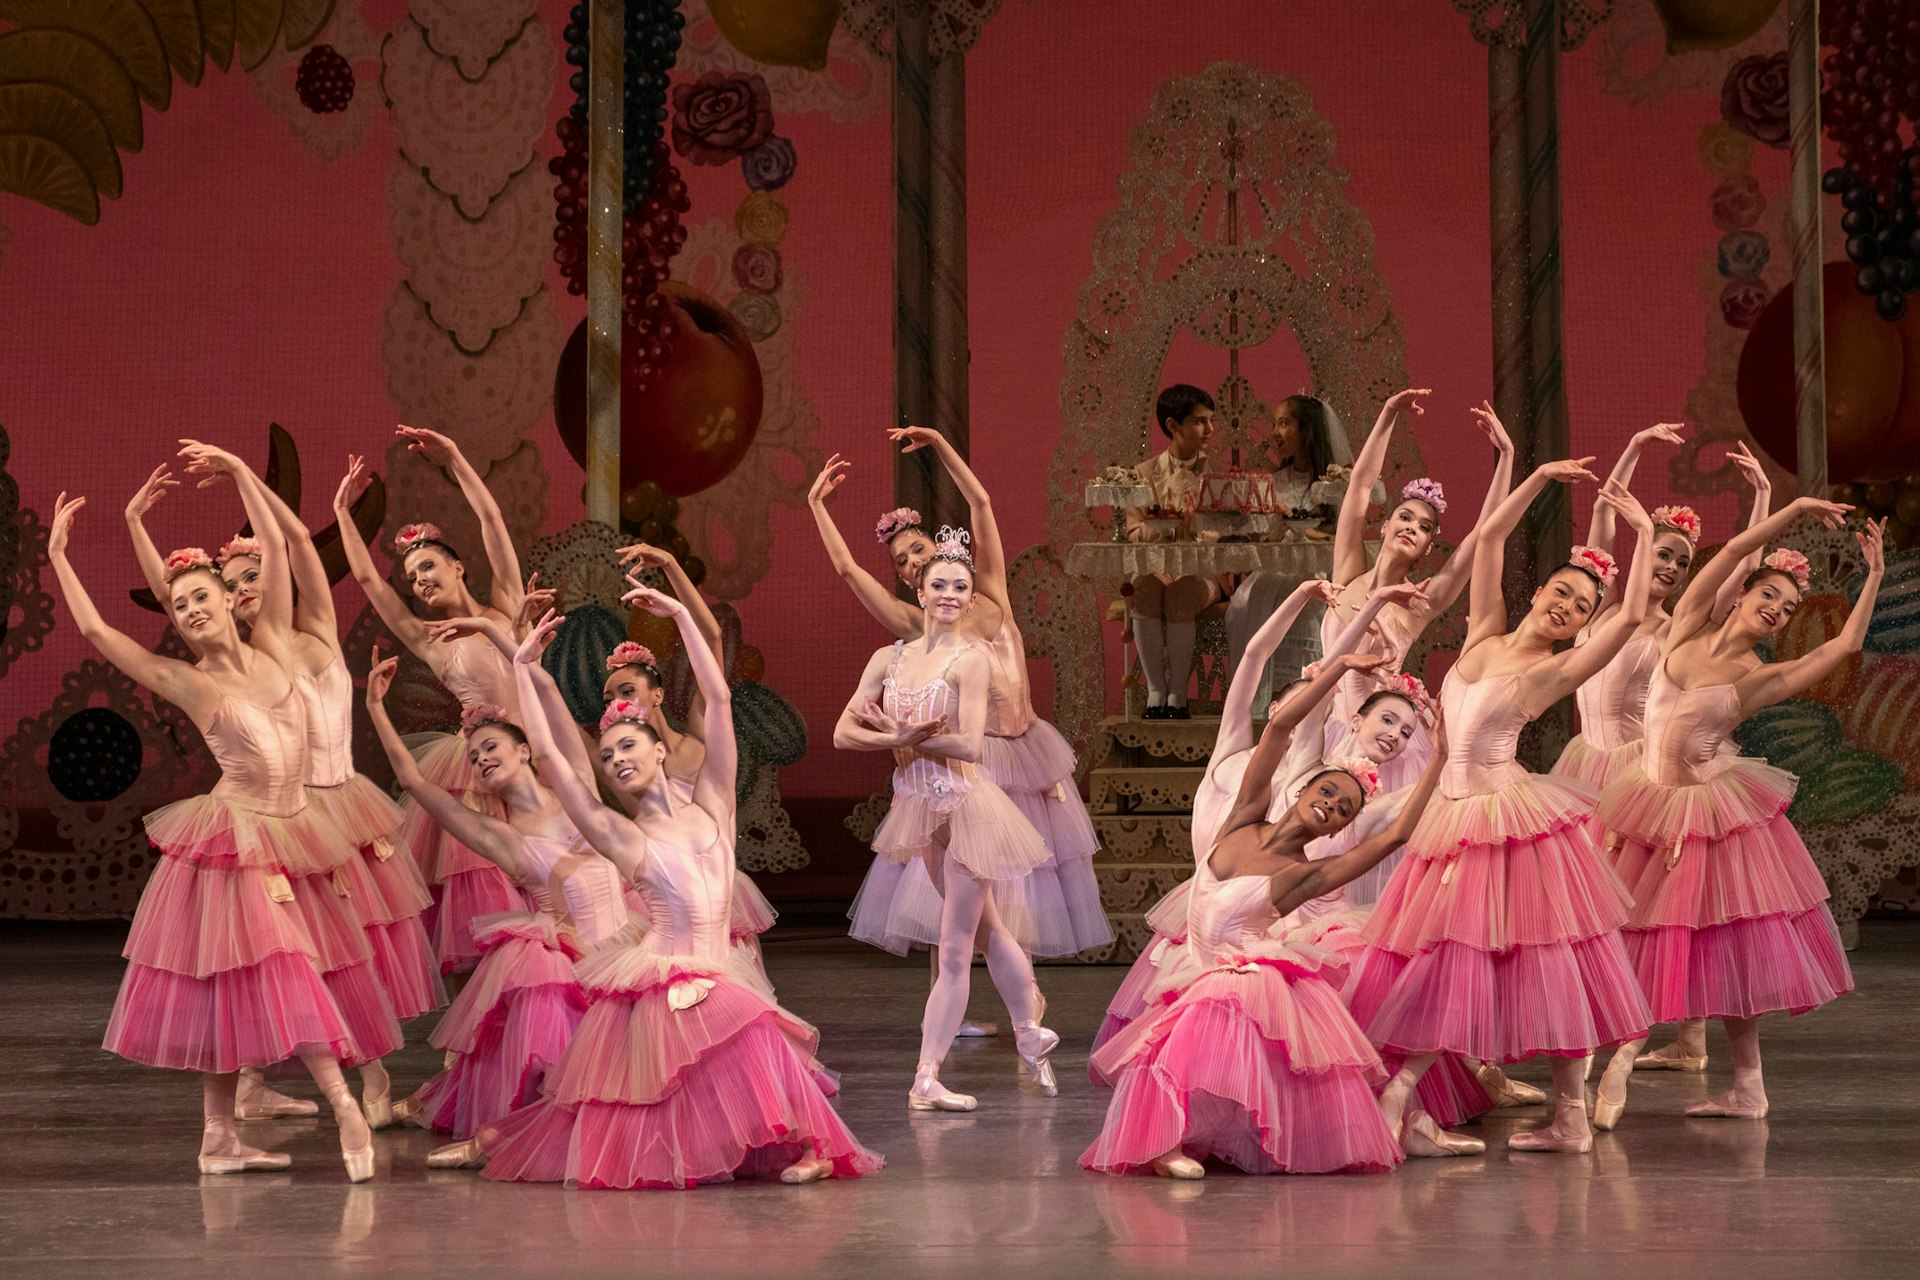 A group of female dancers on stage, dressed in pink 